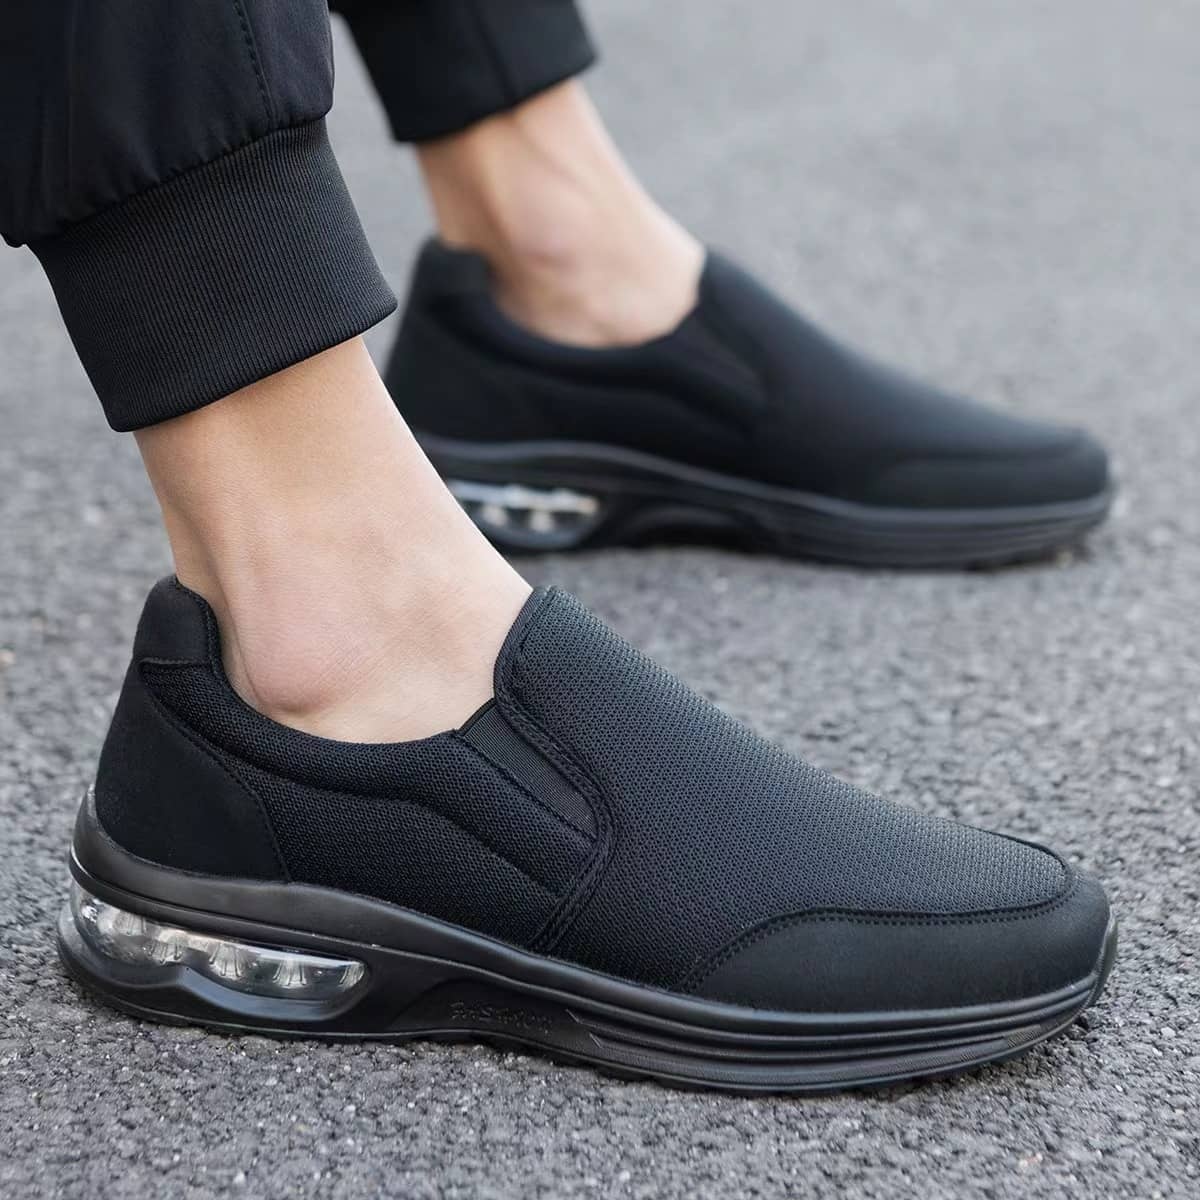 Women's Comfortable Air Cushion Loafers